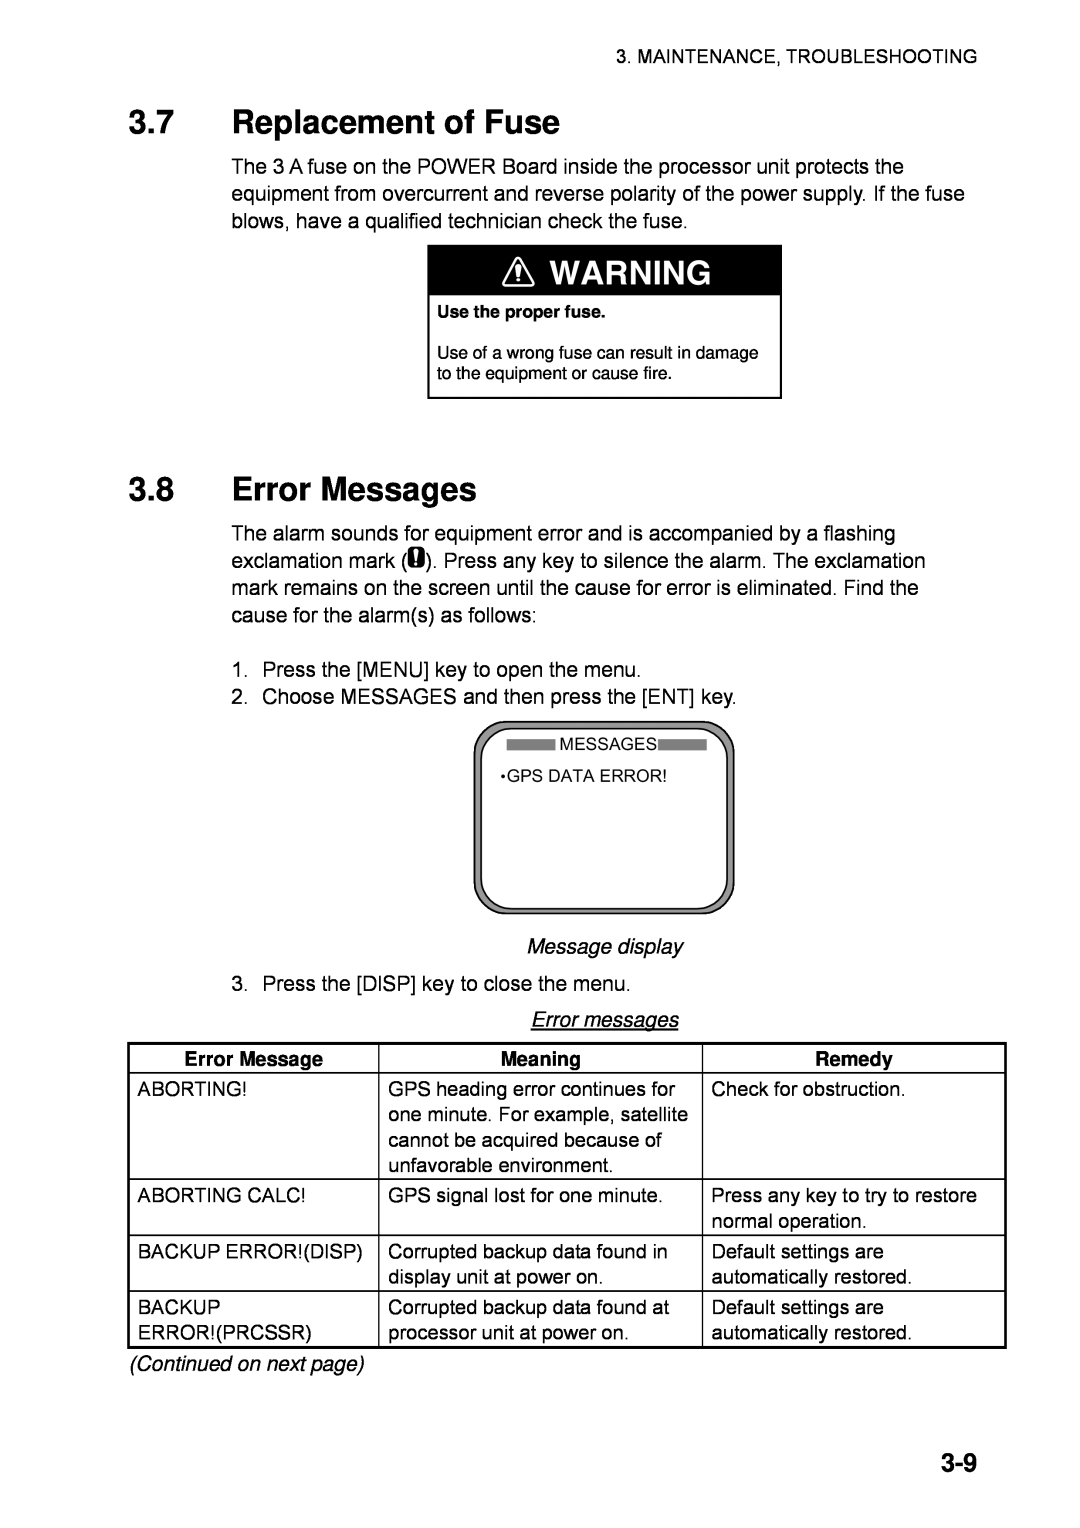 Furuno SC-110 manual 3.7Replacement of Fuse, 3.8Error Messages, Message display, Meaning, Continued on next page, Remedy 